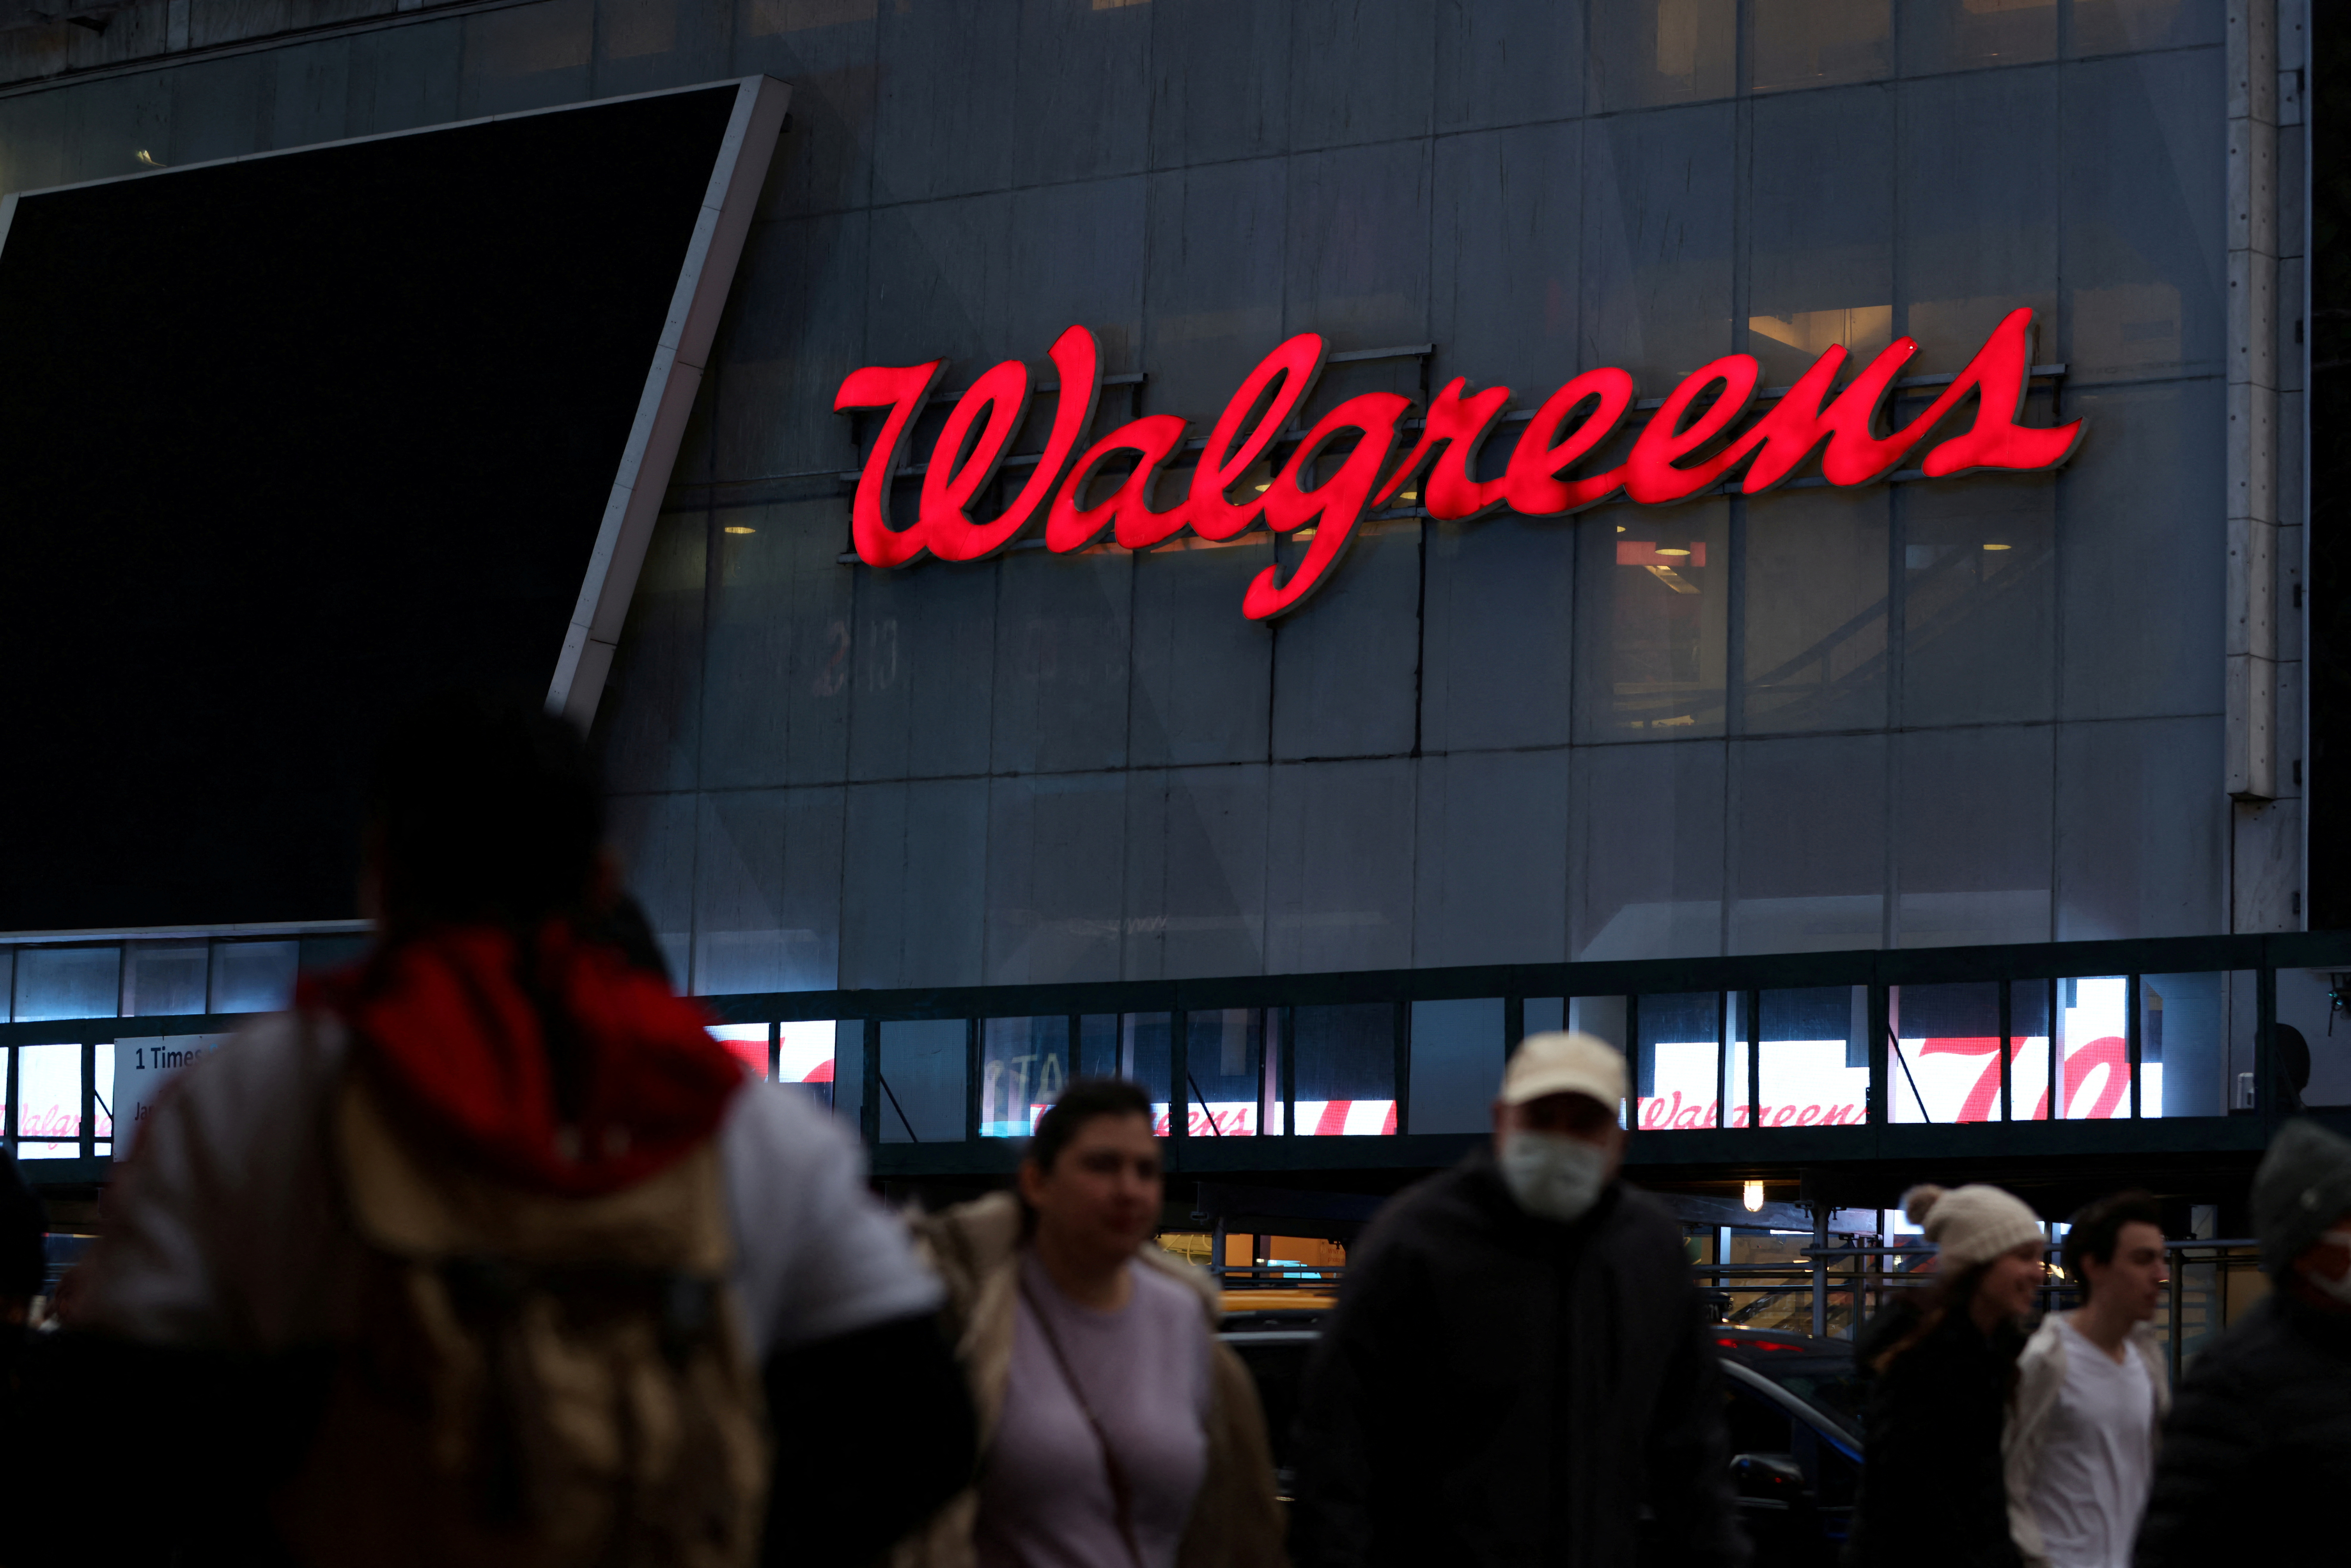 People walk by a Walgreens, owned by the Walgreens Boots Alliance, Inc., in Manhattan, New York City